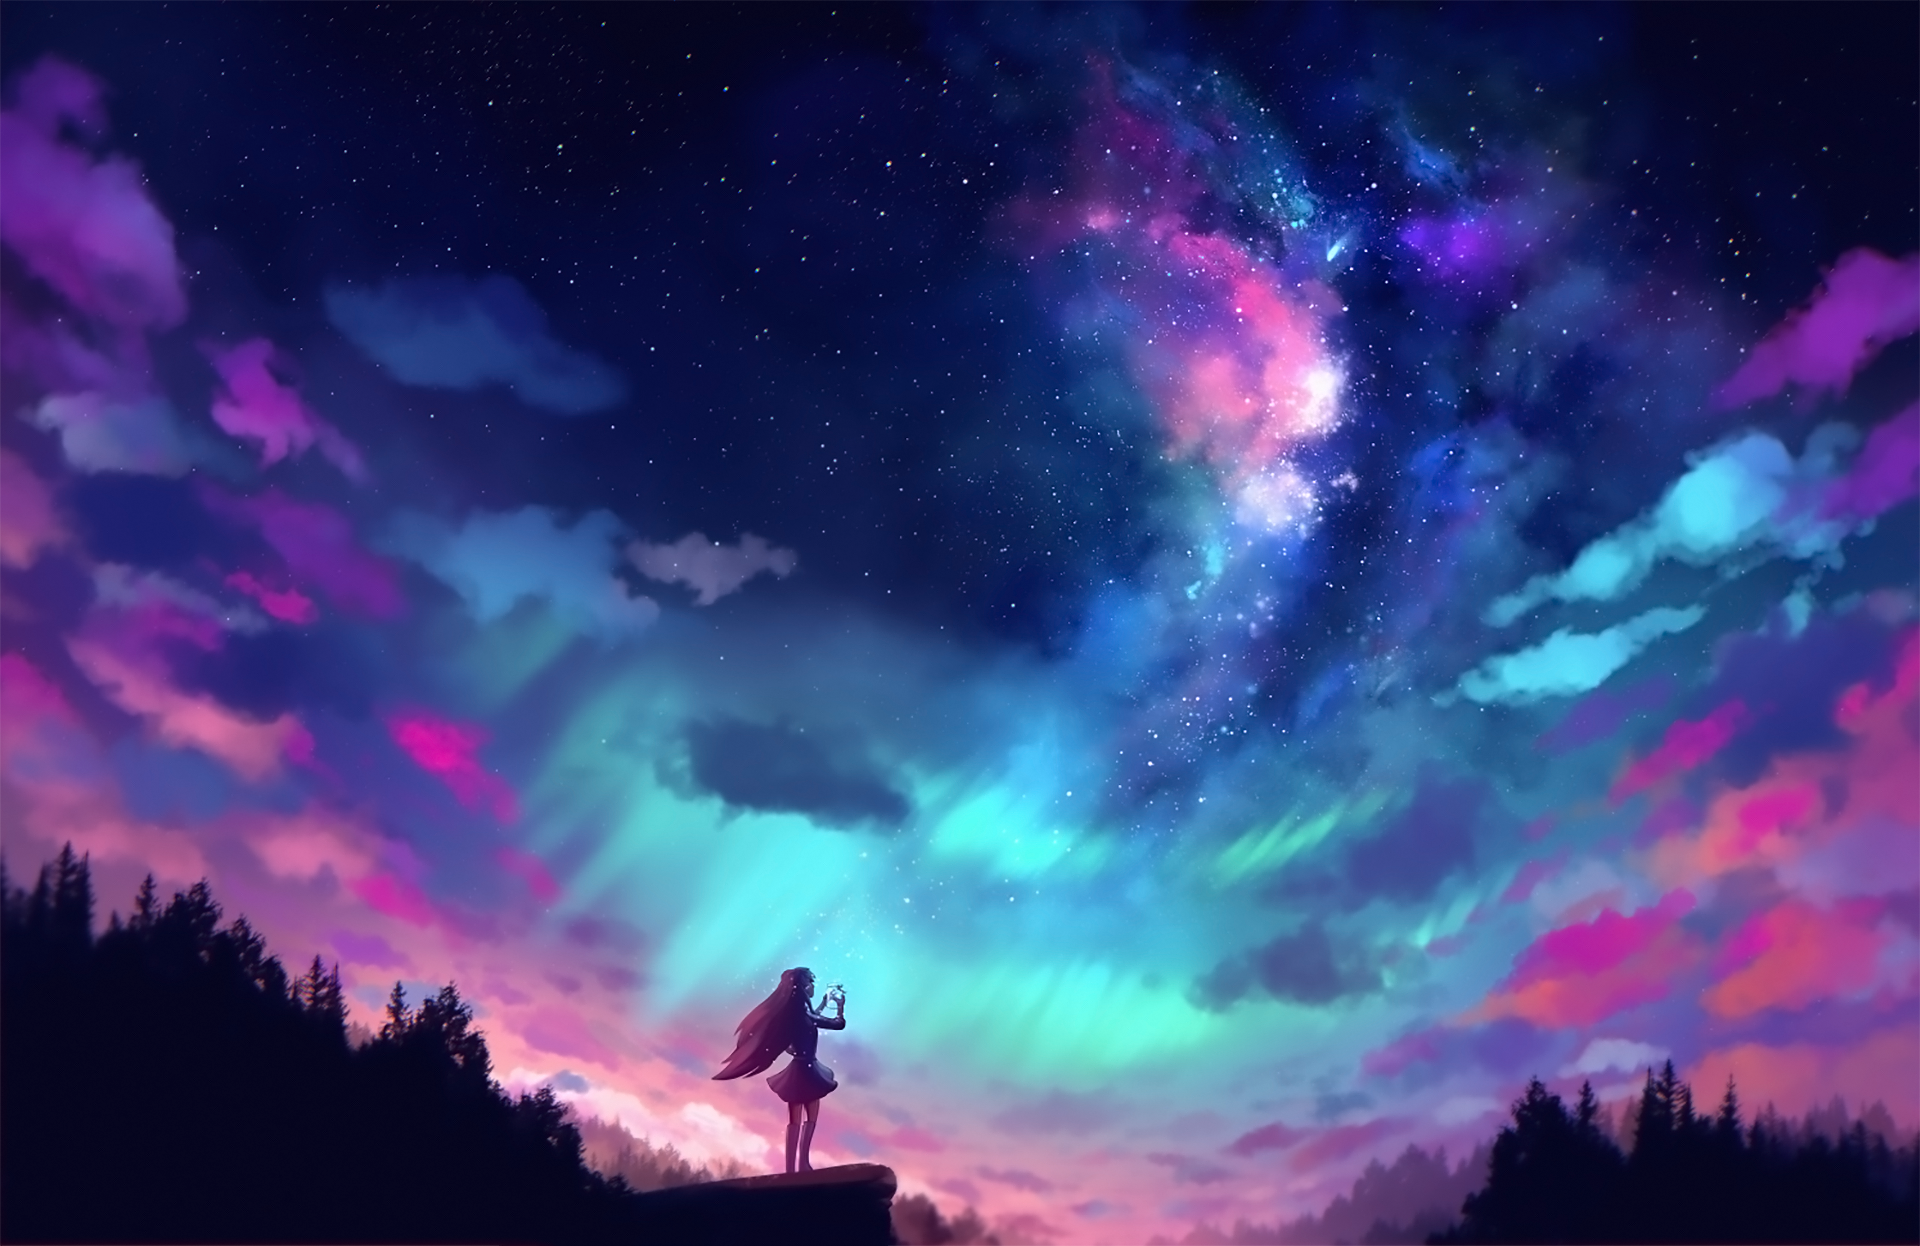 Anime Girl under Colorful Sky by AuroraLion